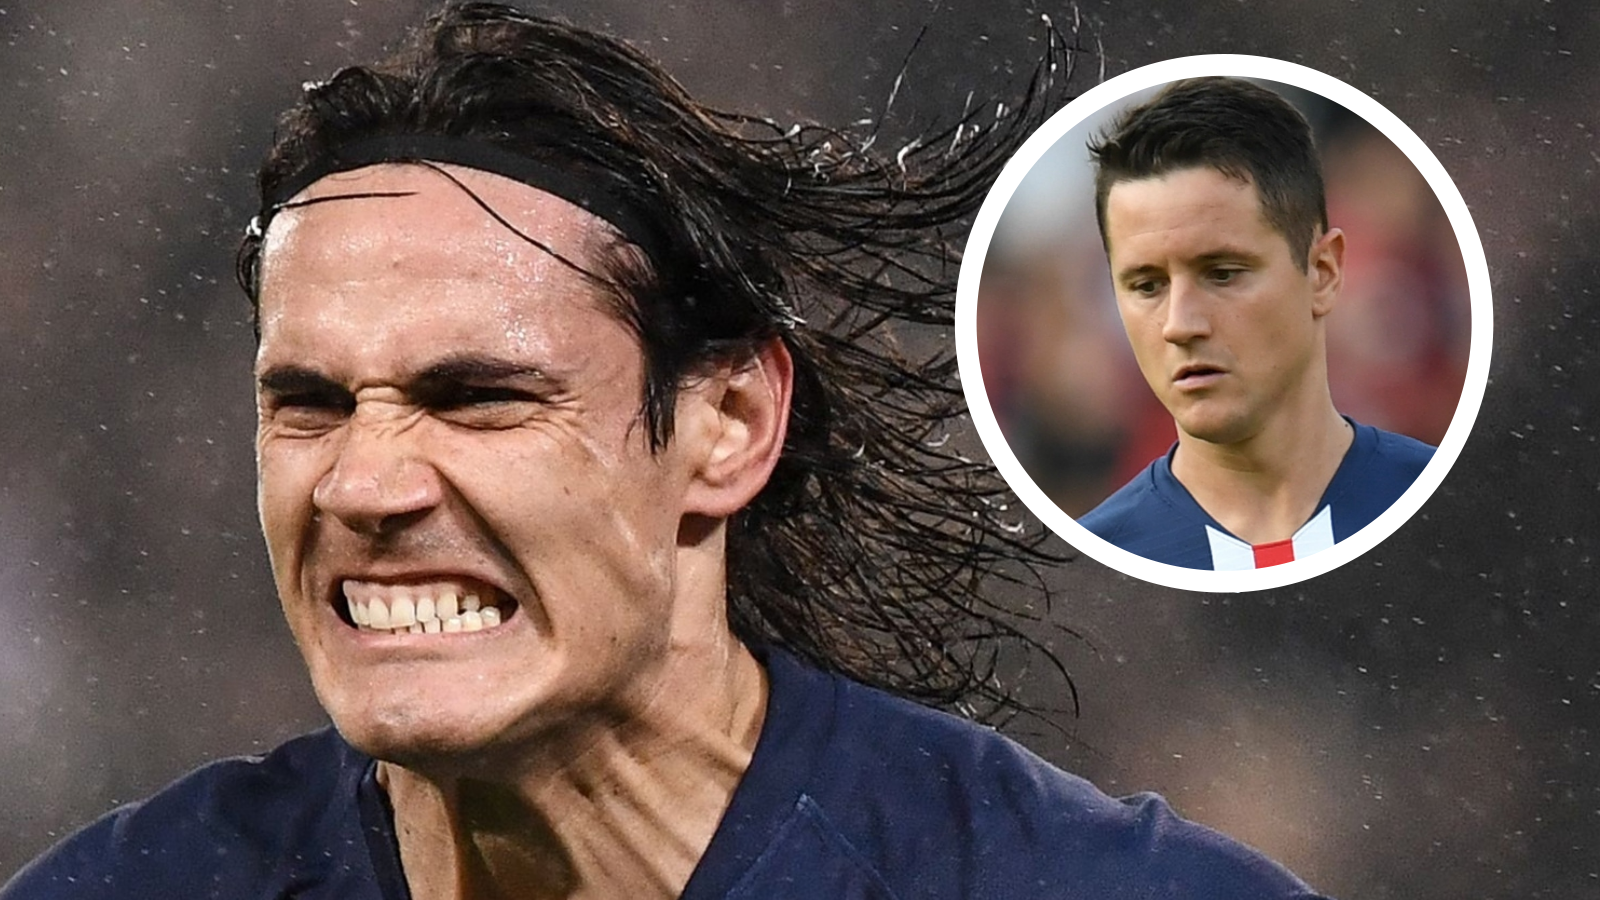 'I have a lot of admiration for Ander' - Ex-Manchester United star Herrera pushed me to Old Trafford move, says Cavani